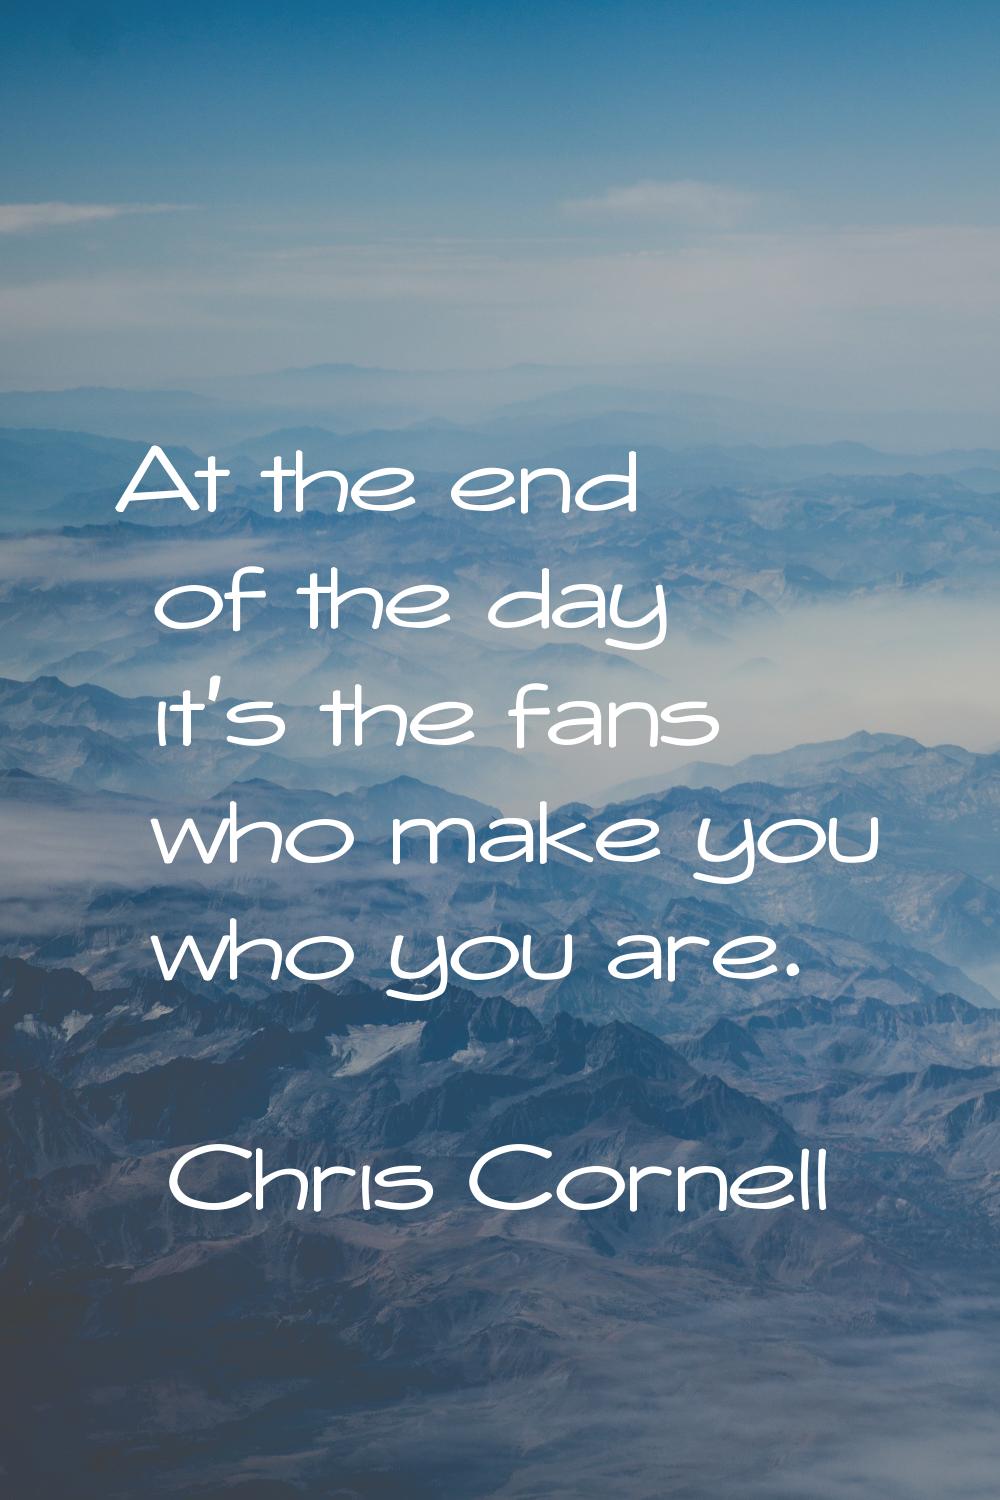 At the end of the day it's the fans who make you who you are.